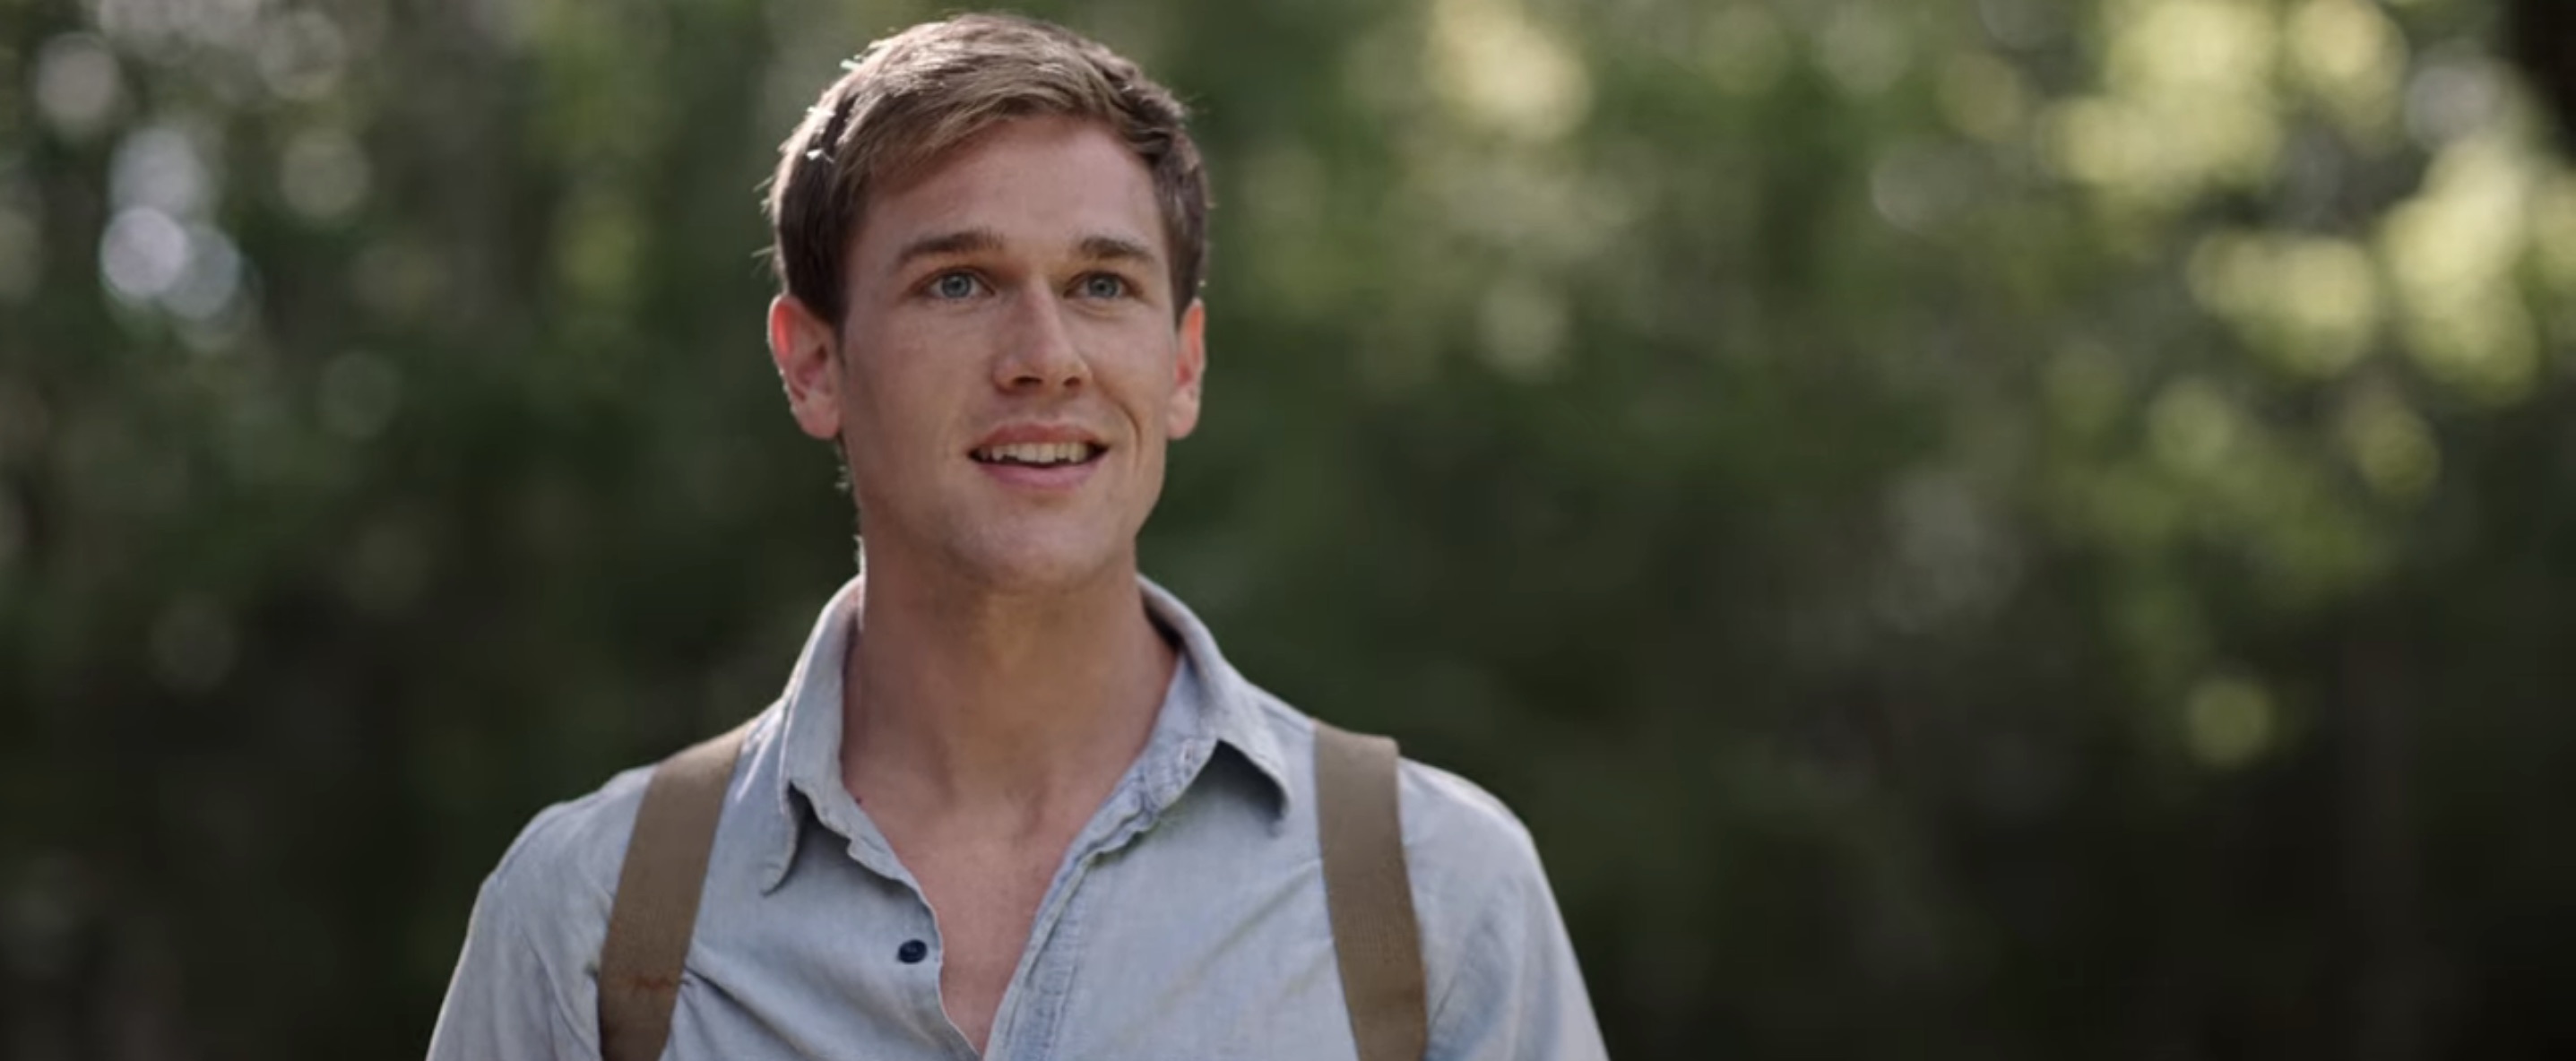 Where the Crawdads Sing Cast on Netflix - Taylor John Smith as Tate Walker